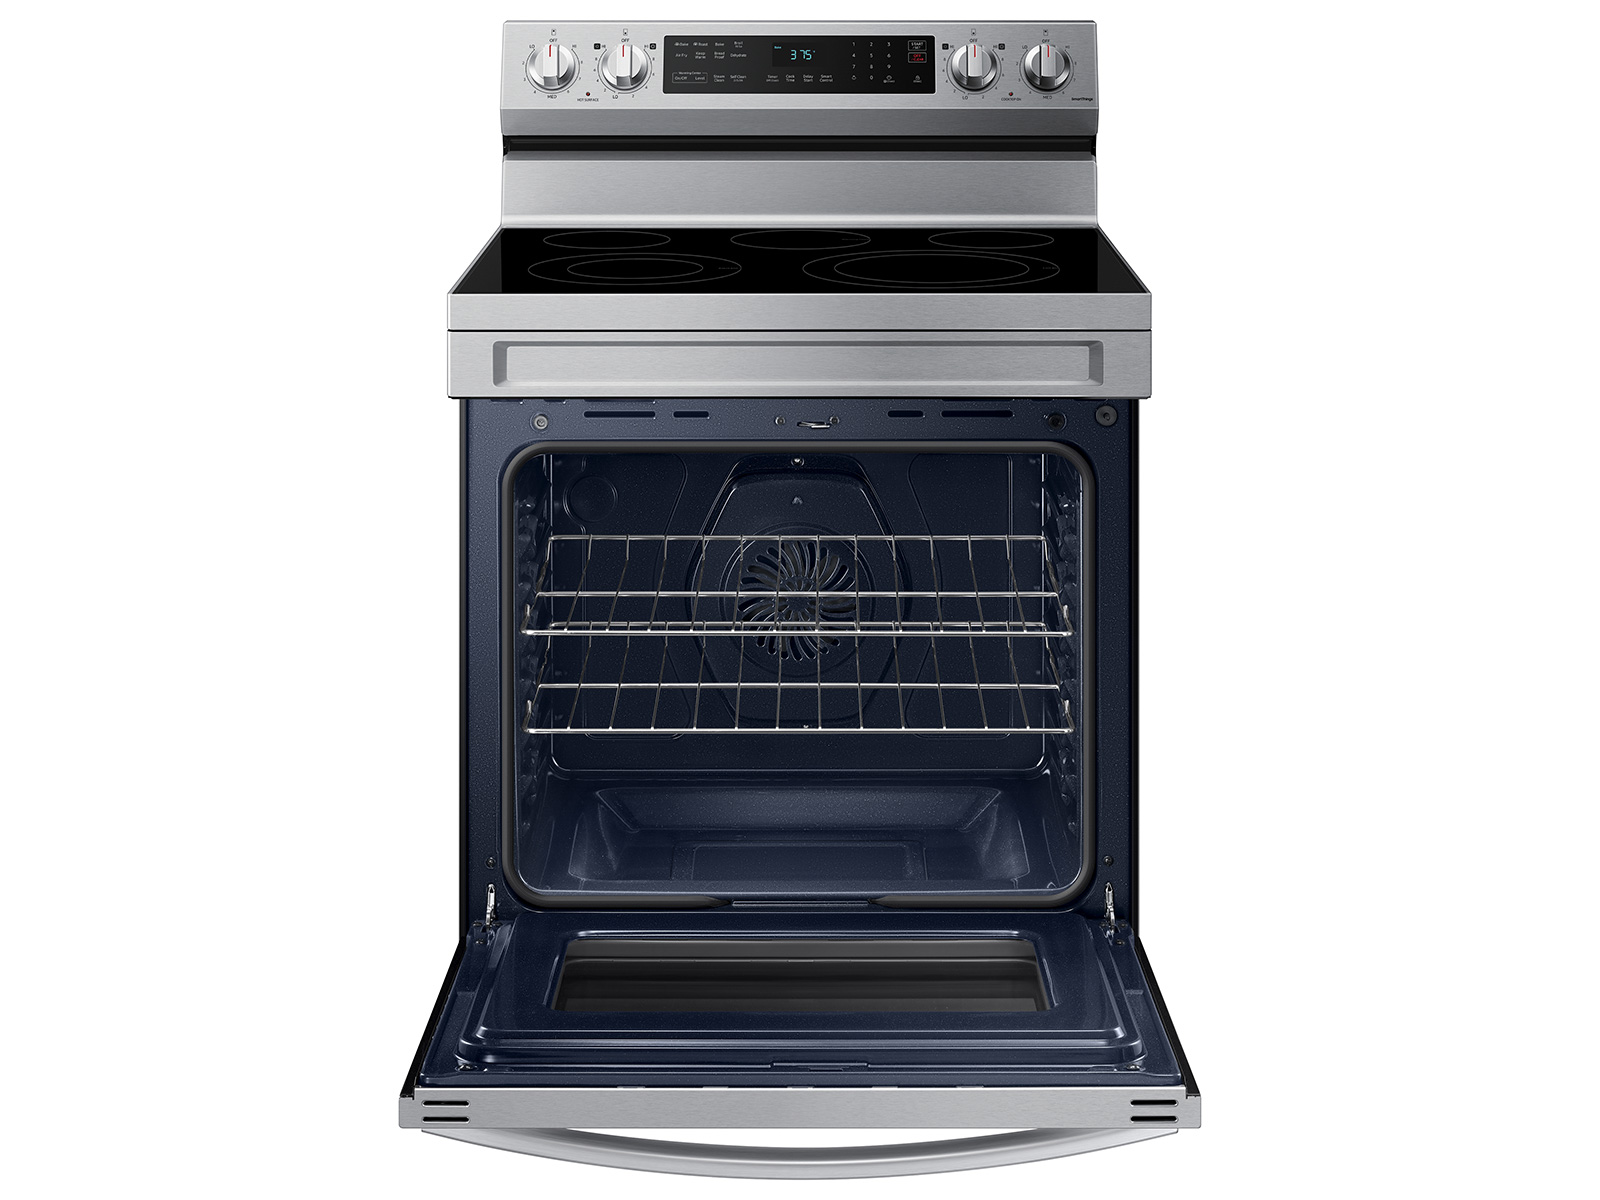 GE 6.6 Cu. Ft. Freestanding Double Oven Electric Convection Range